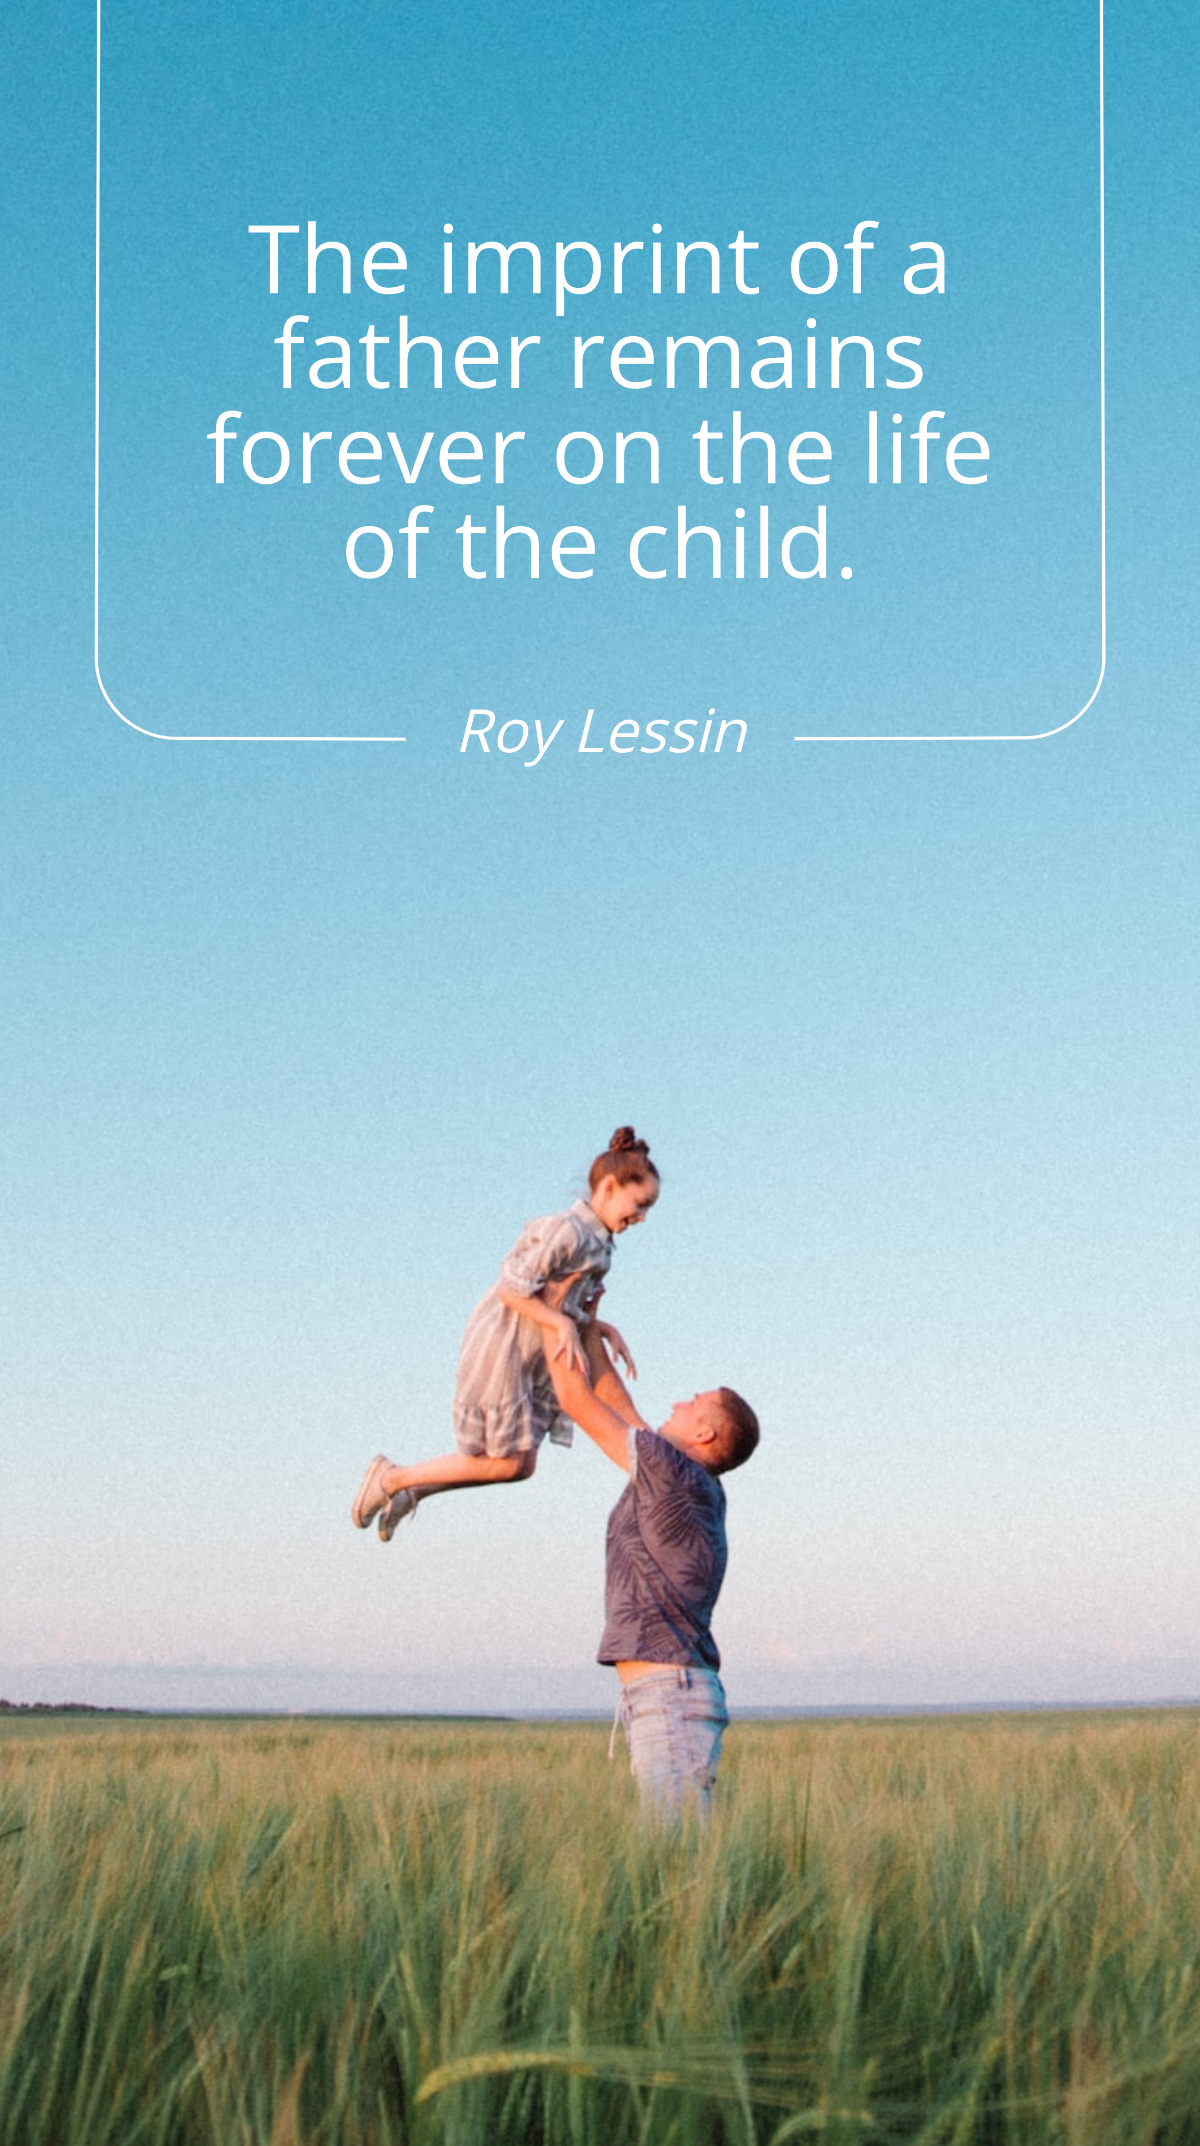 Roy Lessin - The imprint of a father remains forever on the life of the child. Template